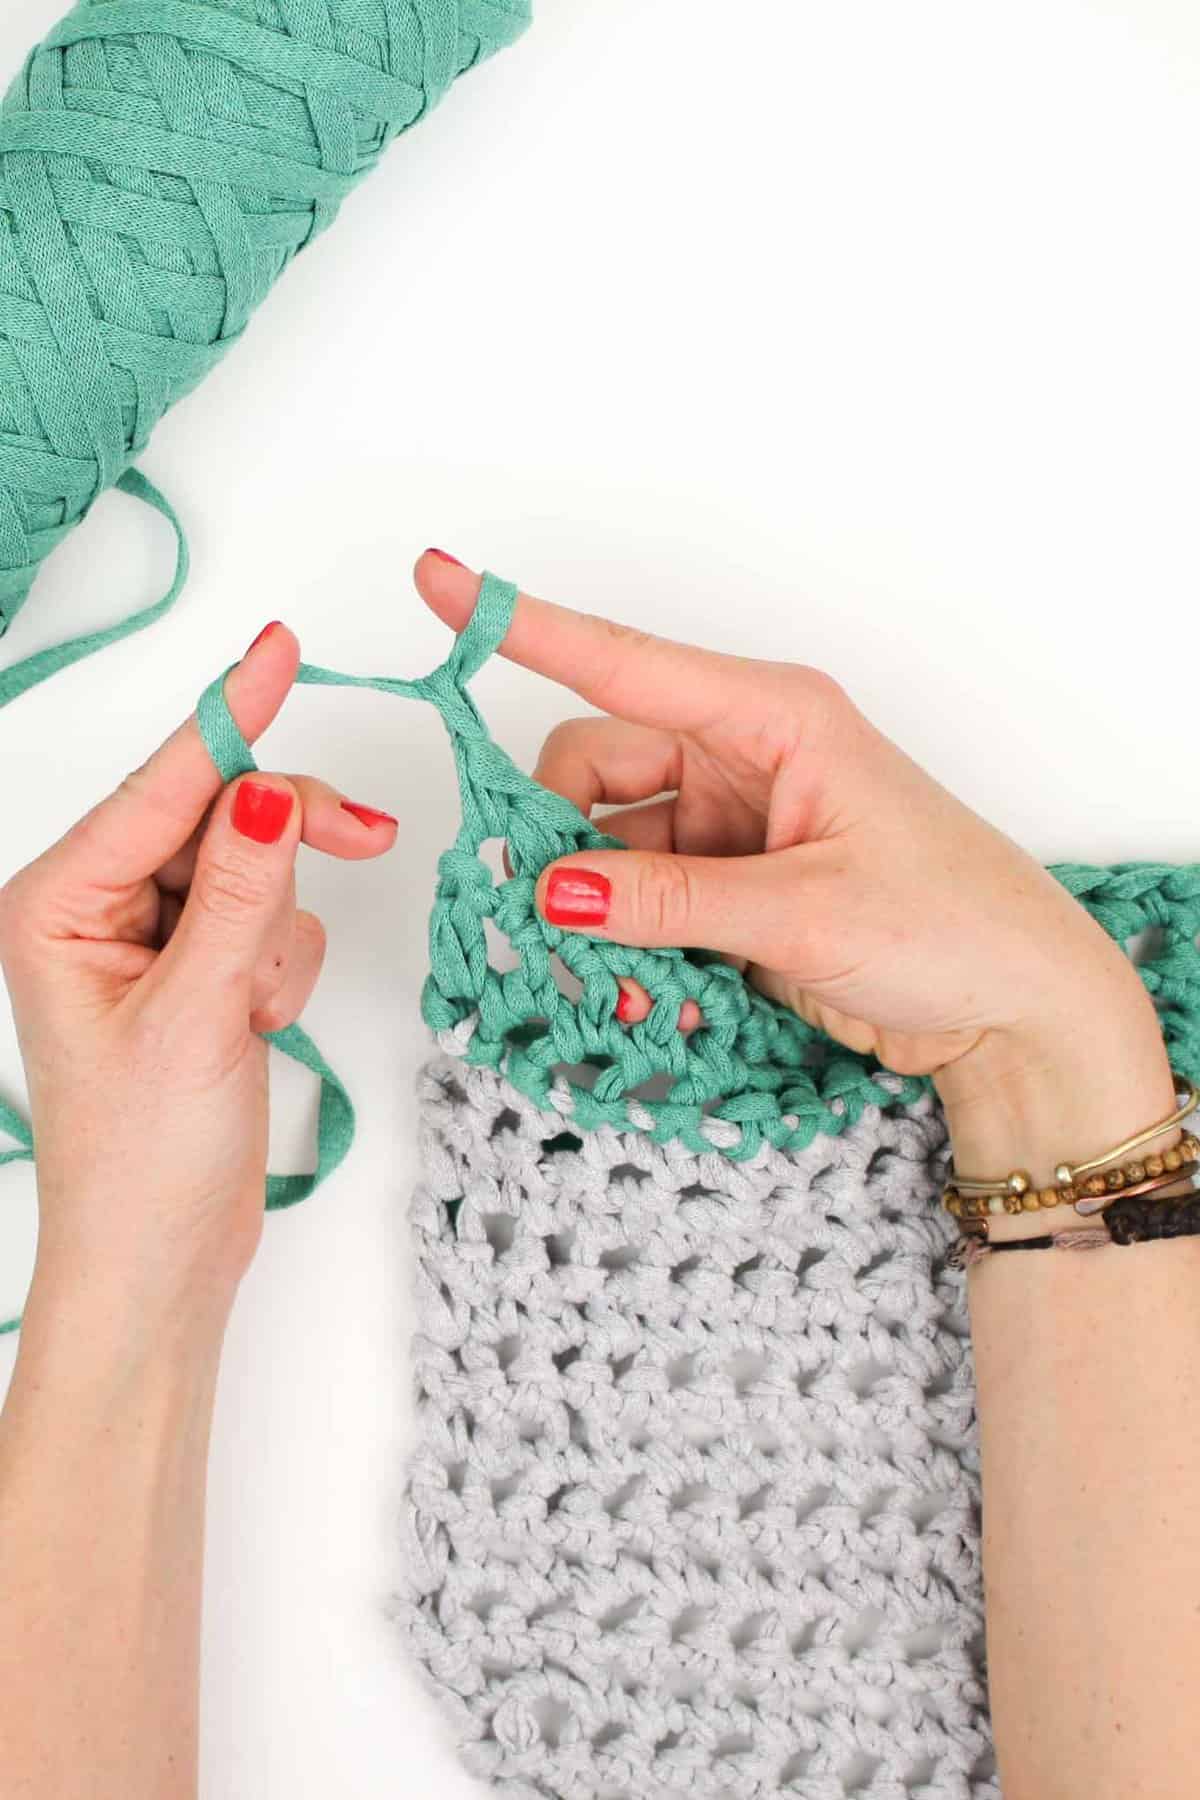 How to finger crochet (which is essentially the same as arm crochet).